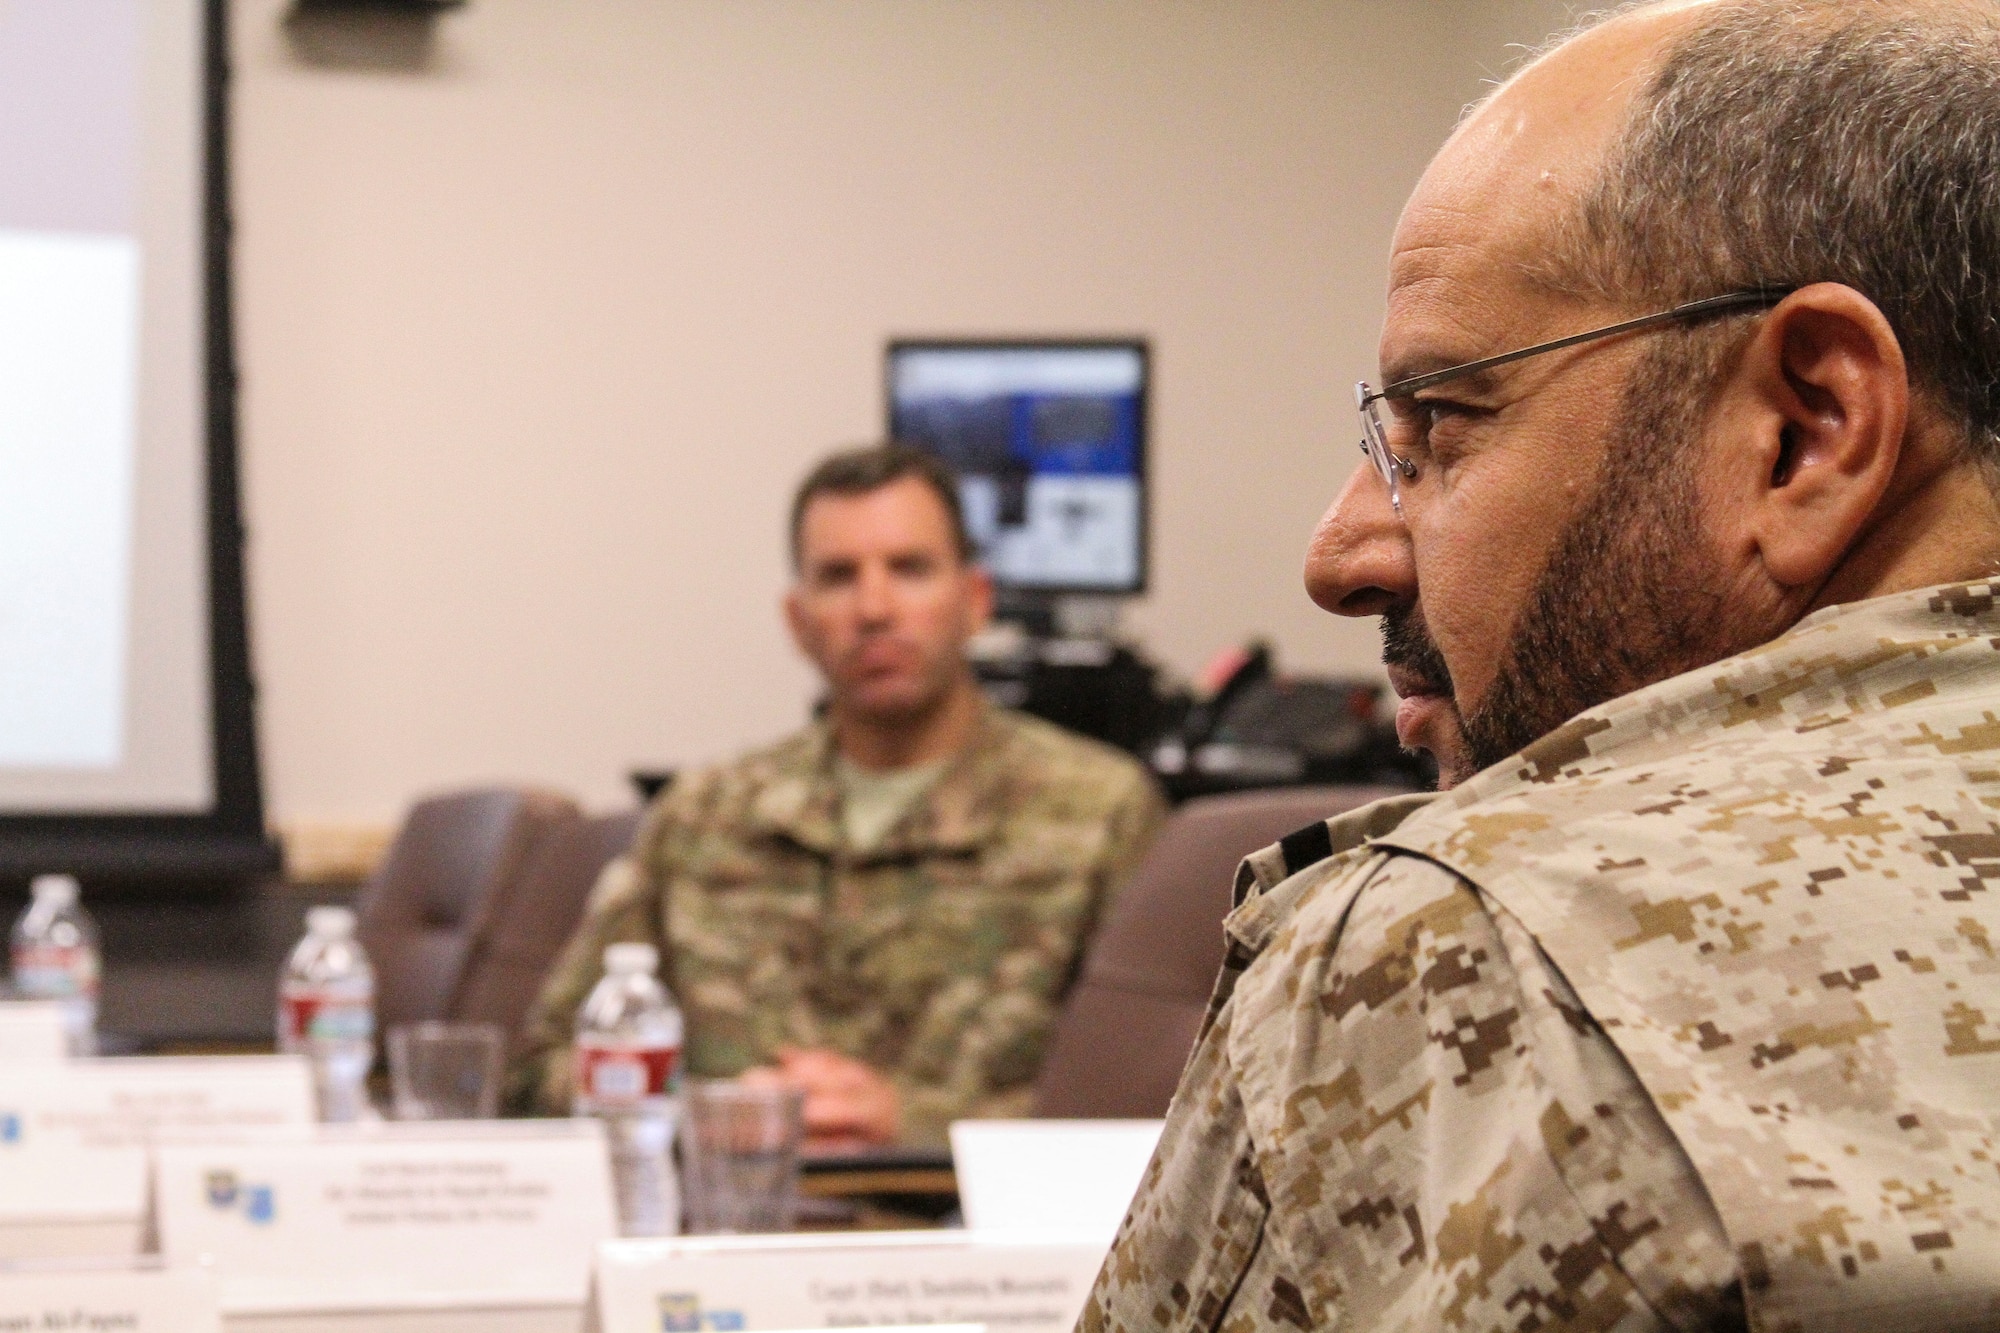 Col. Sean Choquette, Commander of the 563rd Rescue Group, briefs Lt. Gen. Fayyadh Al-Ruwaili, Commander of the Royal Saudi Air Force, on the importance of Exercise ANGEL THUNDER during his visit to Davis-Monthan AFB, Ariz., May 8, 2014.   Al-Ruwaili visited Davis-Monthan AFB by invitation of the Chief of Staff of the Air Force during a counterpart visit.  The primary purpose of visit is to observe Exercise ANGEL THUNDER operations as well as receive an orientation at the 12 AF (AFSOUTH) Air and Space Operations Center.  (U.S. Air Force photo by Tech. Sgt. Heather R. Redman/Released)